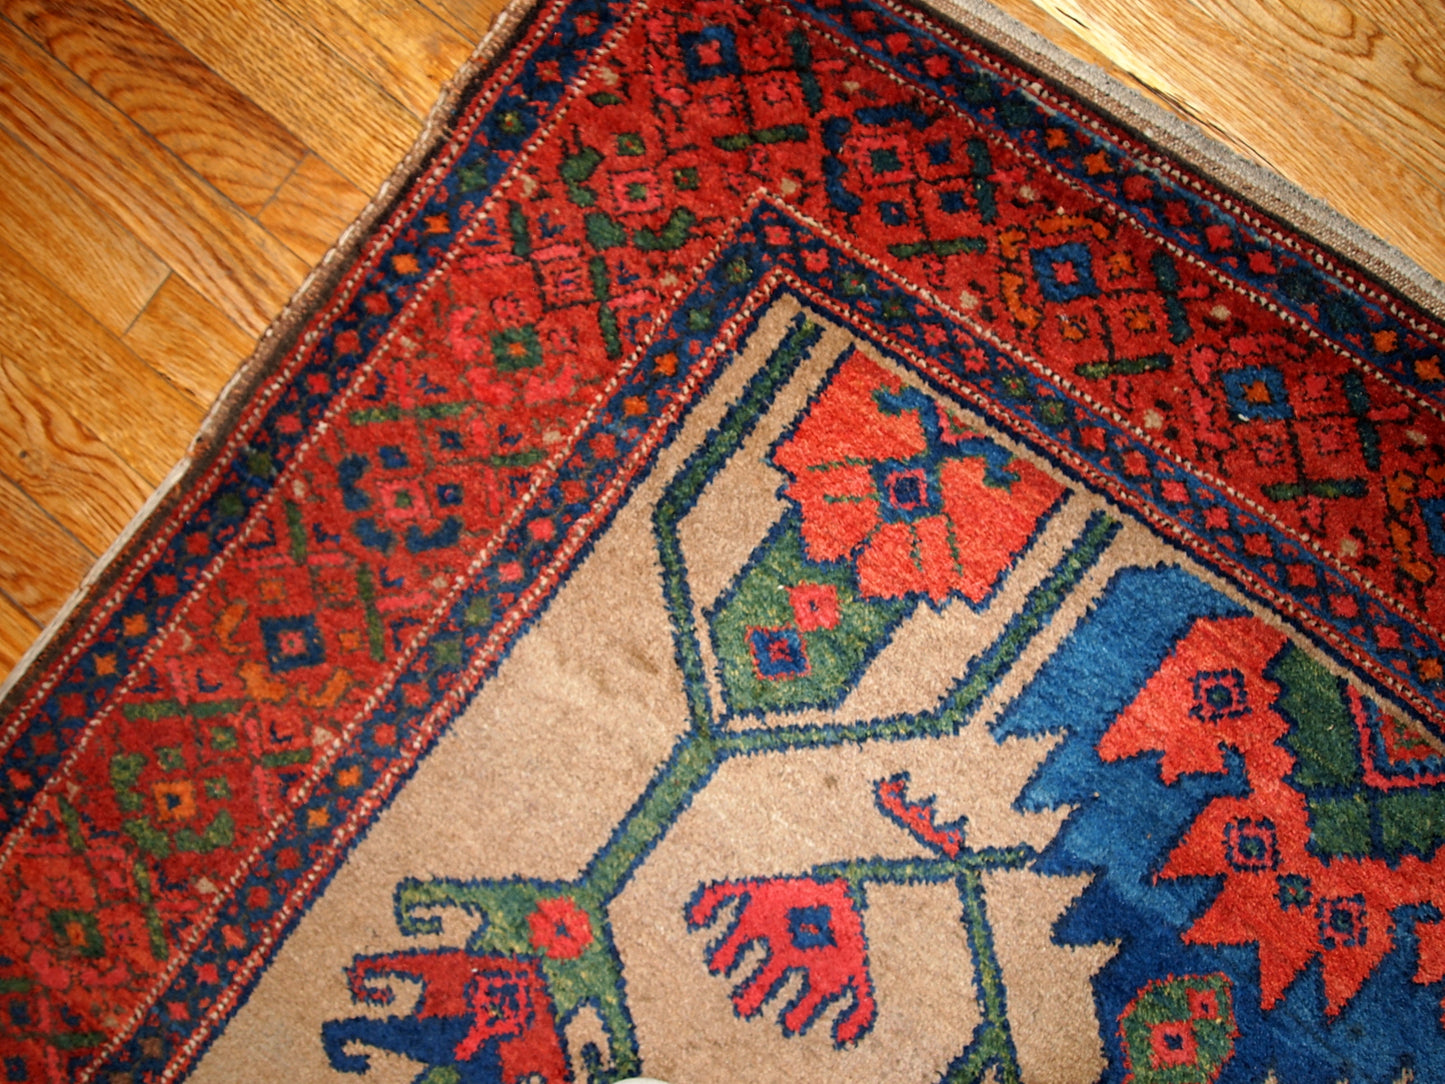 Antique Persian Kurdish rug in light brown background color. Very primitive tribal design with large ornaments. The rug is in original good condition.